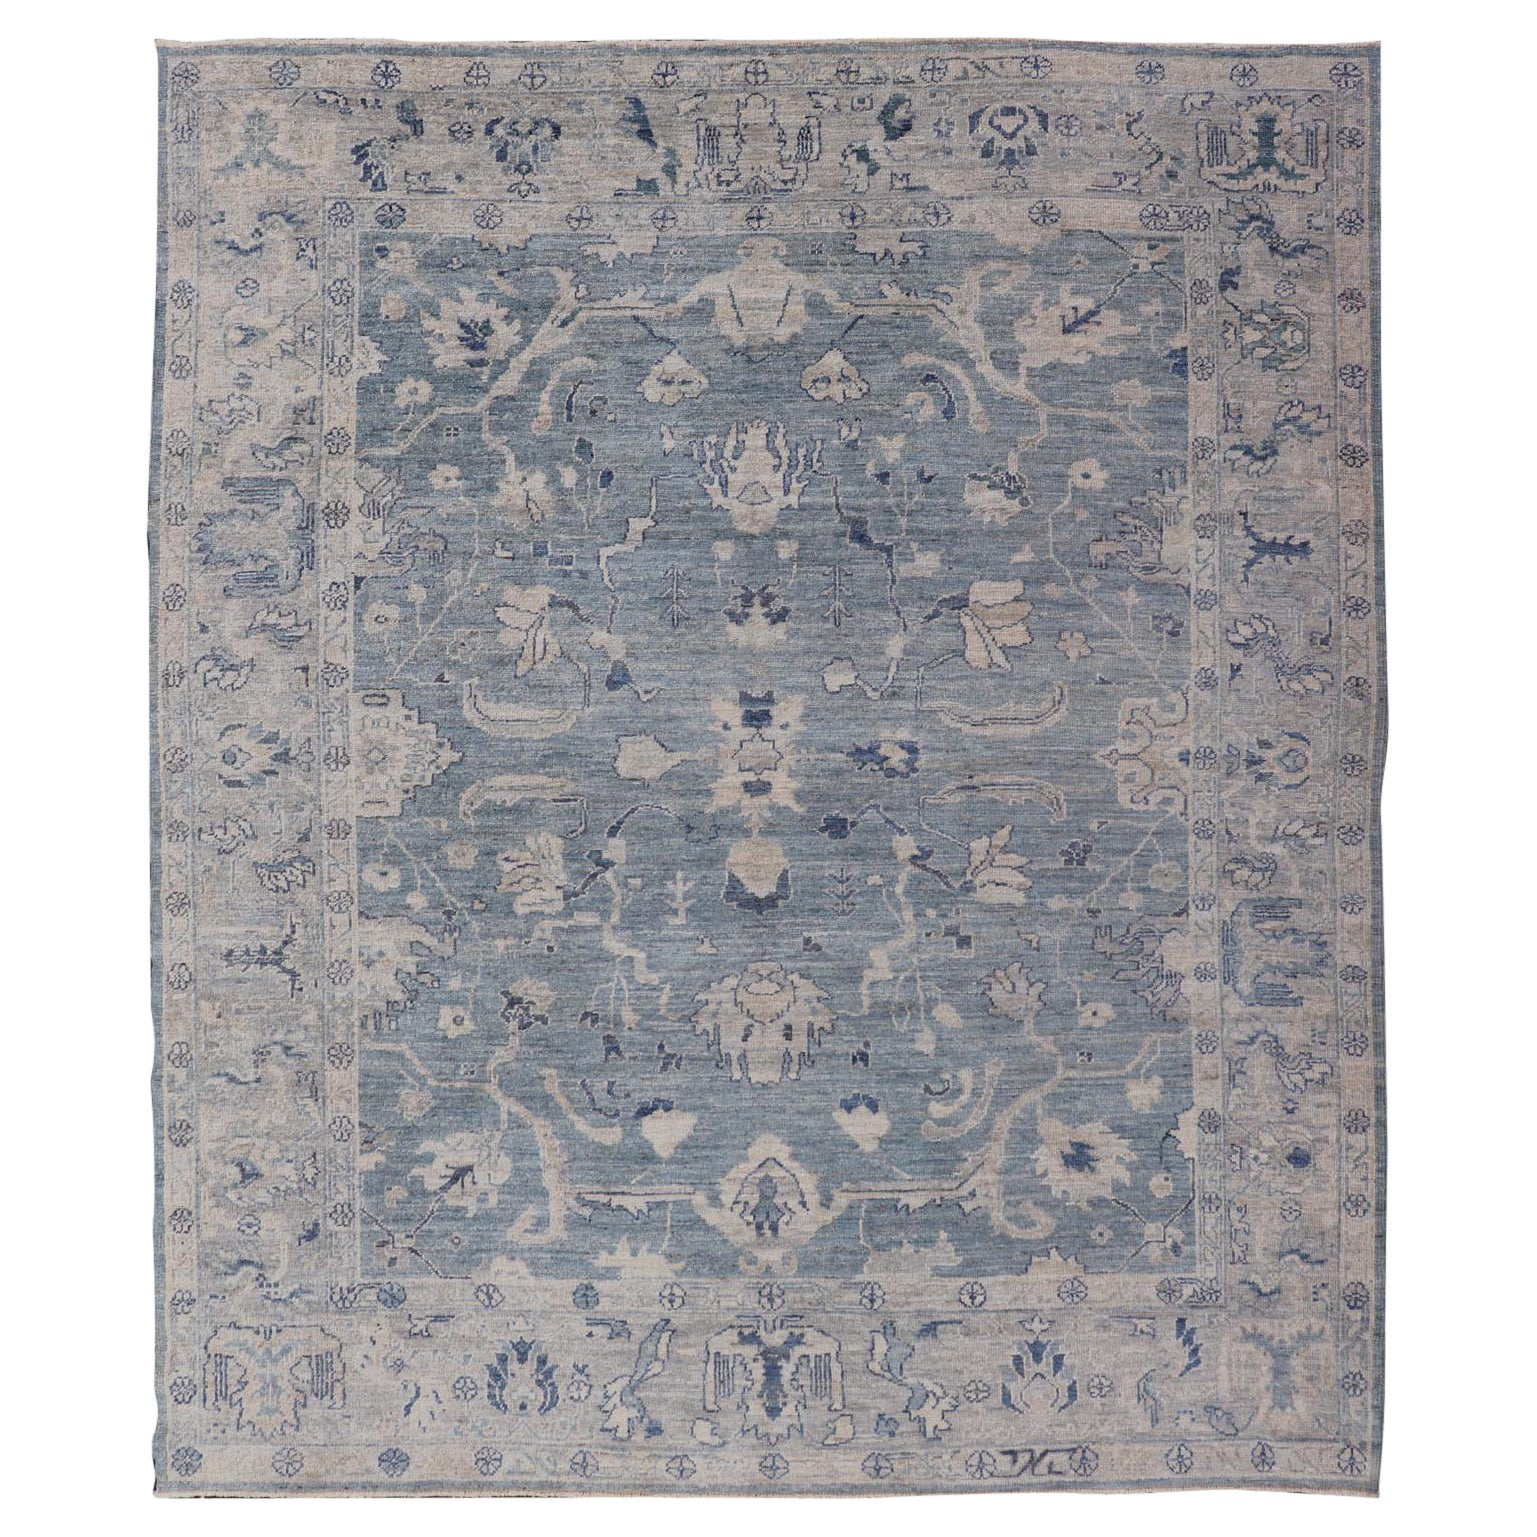 Turkish Angora Oushak Rug in Dusty Blue Background and Silver Border For Sale